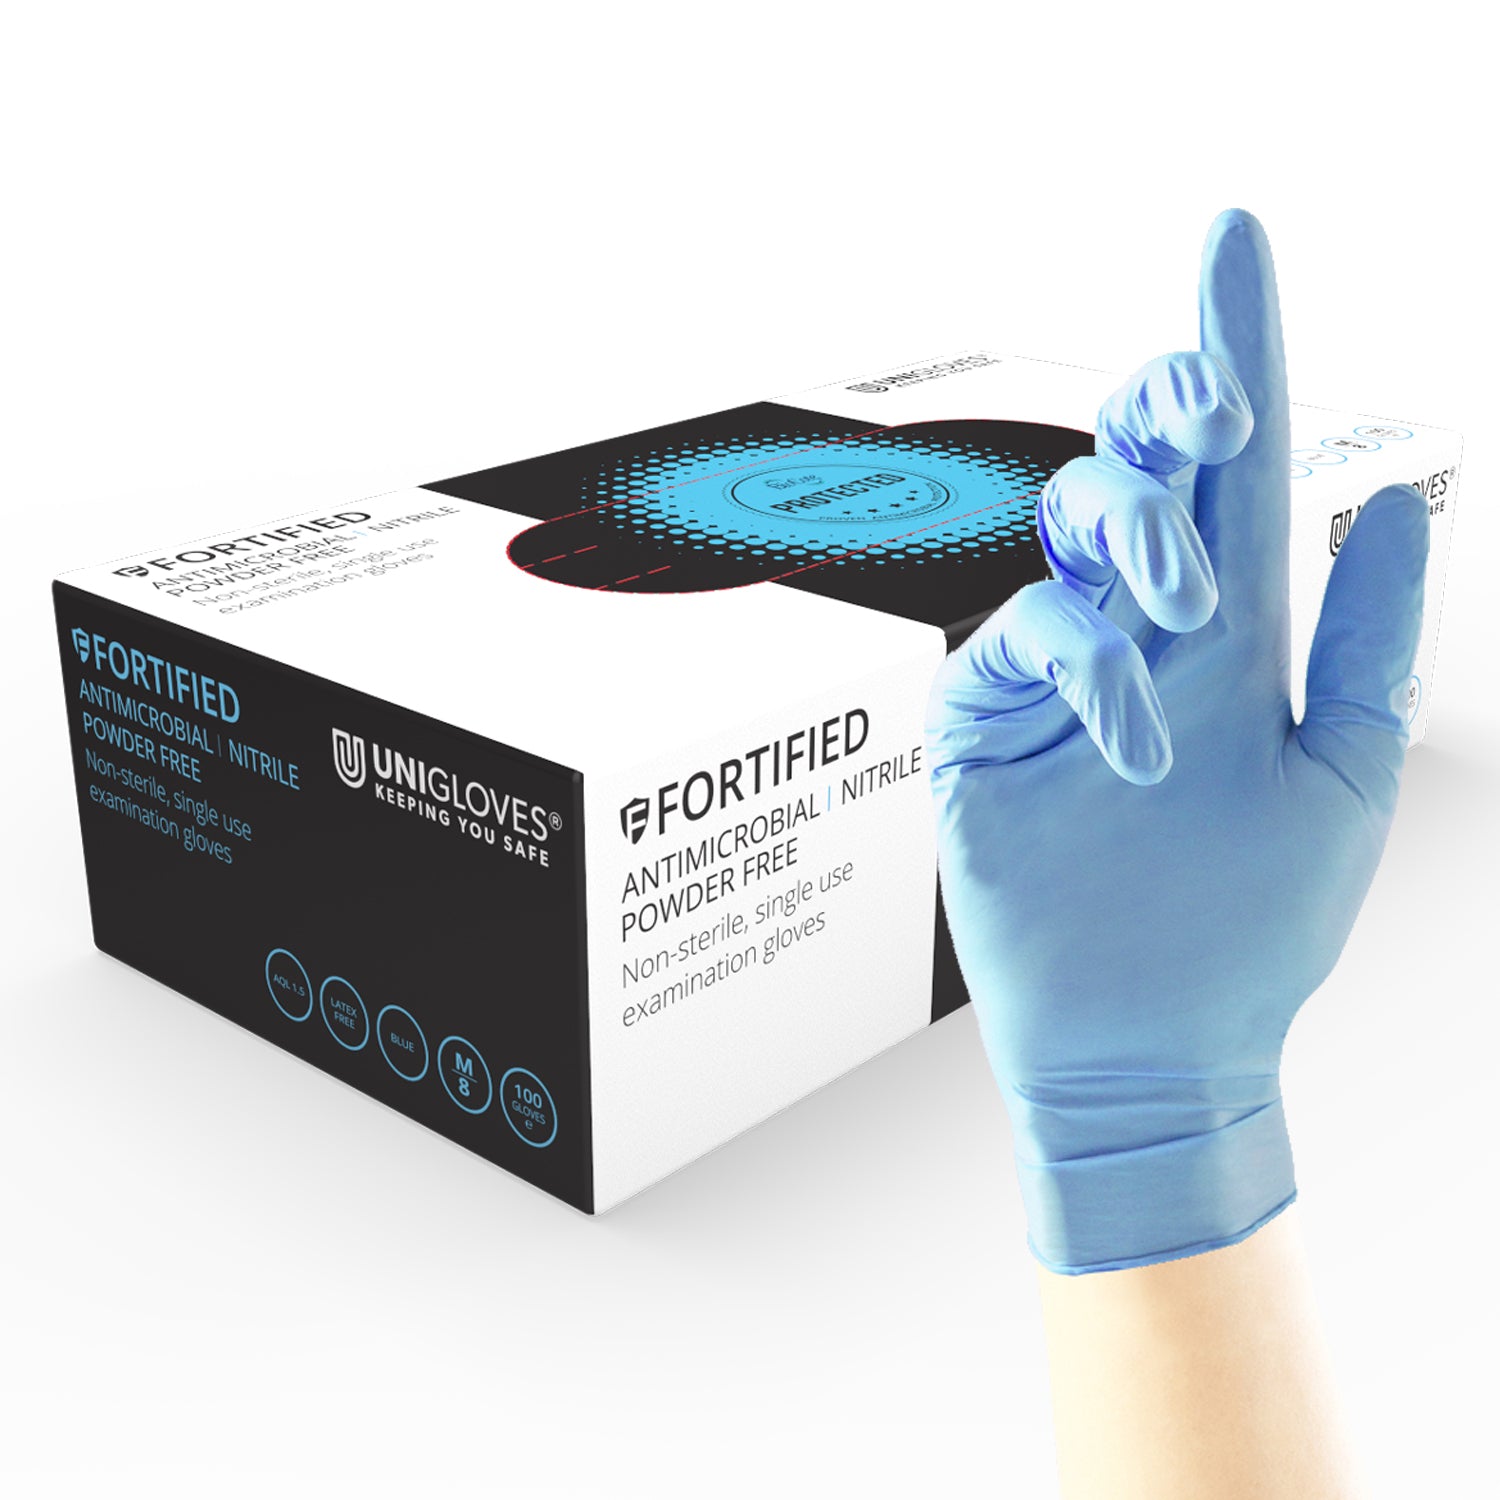 Fortified Blue Nitrile